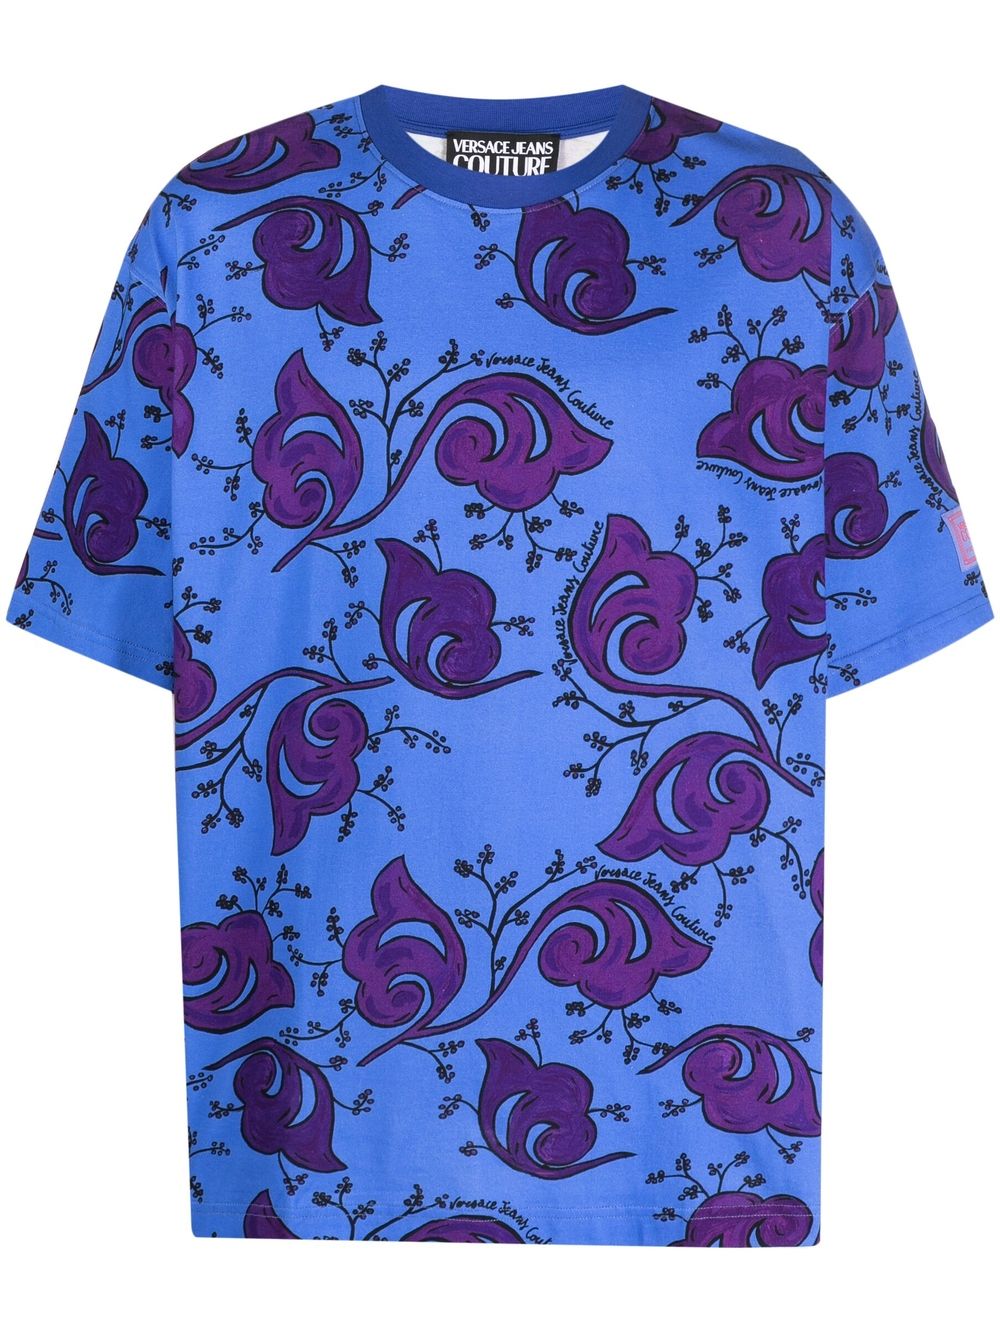 Versace Jeans Couture T-Shirt mit Barock-Print - Blau von Versace Jeans Couture